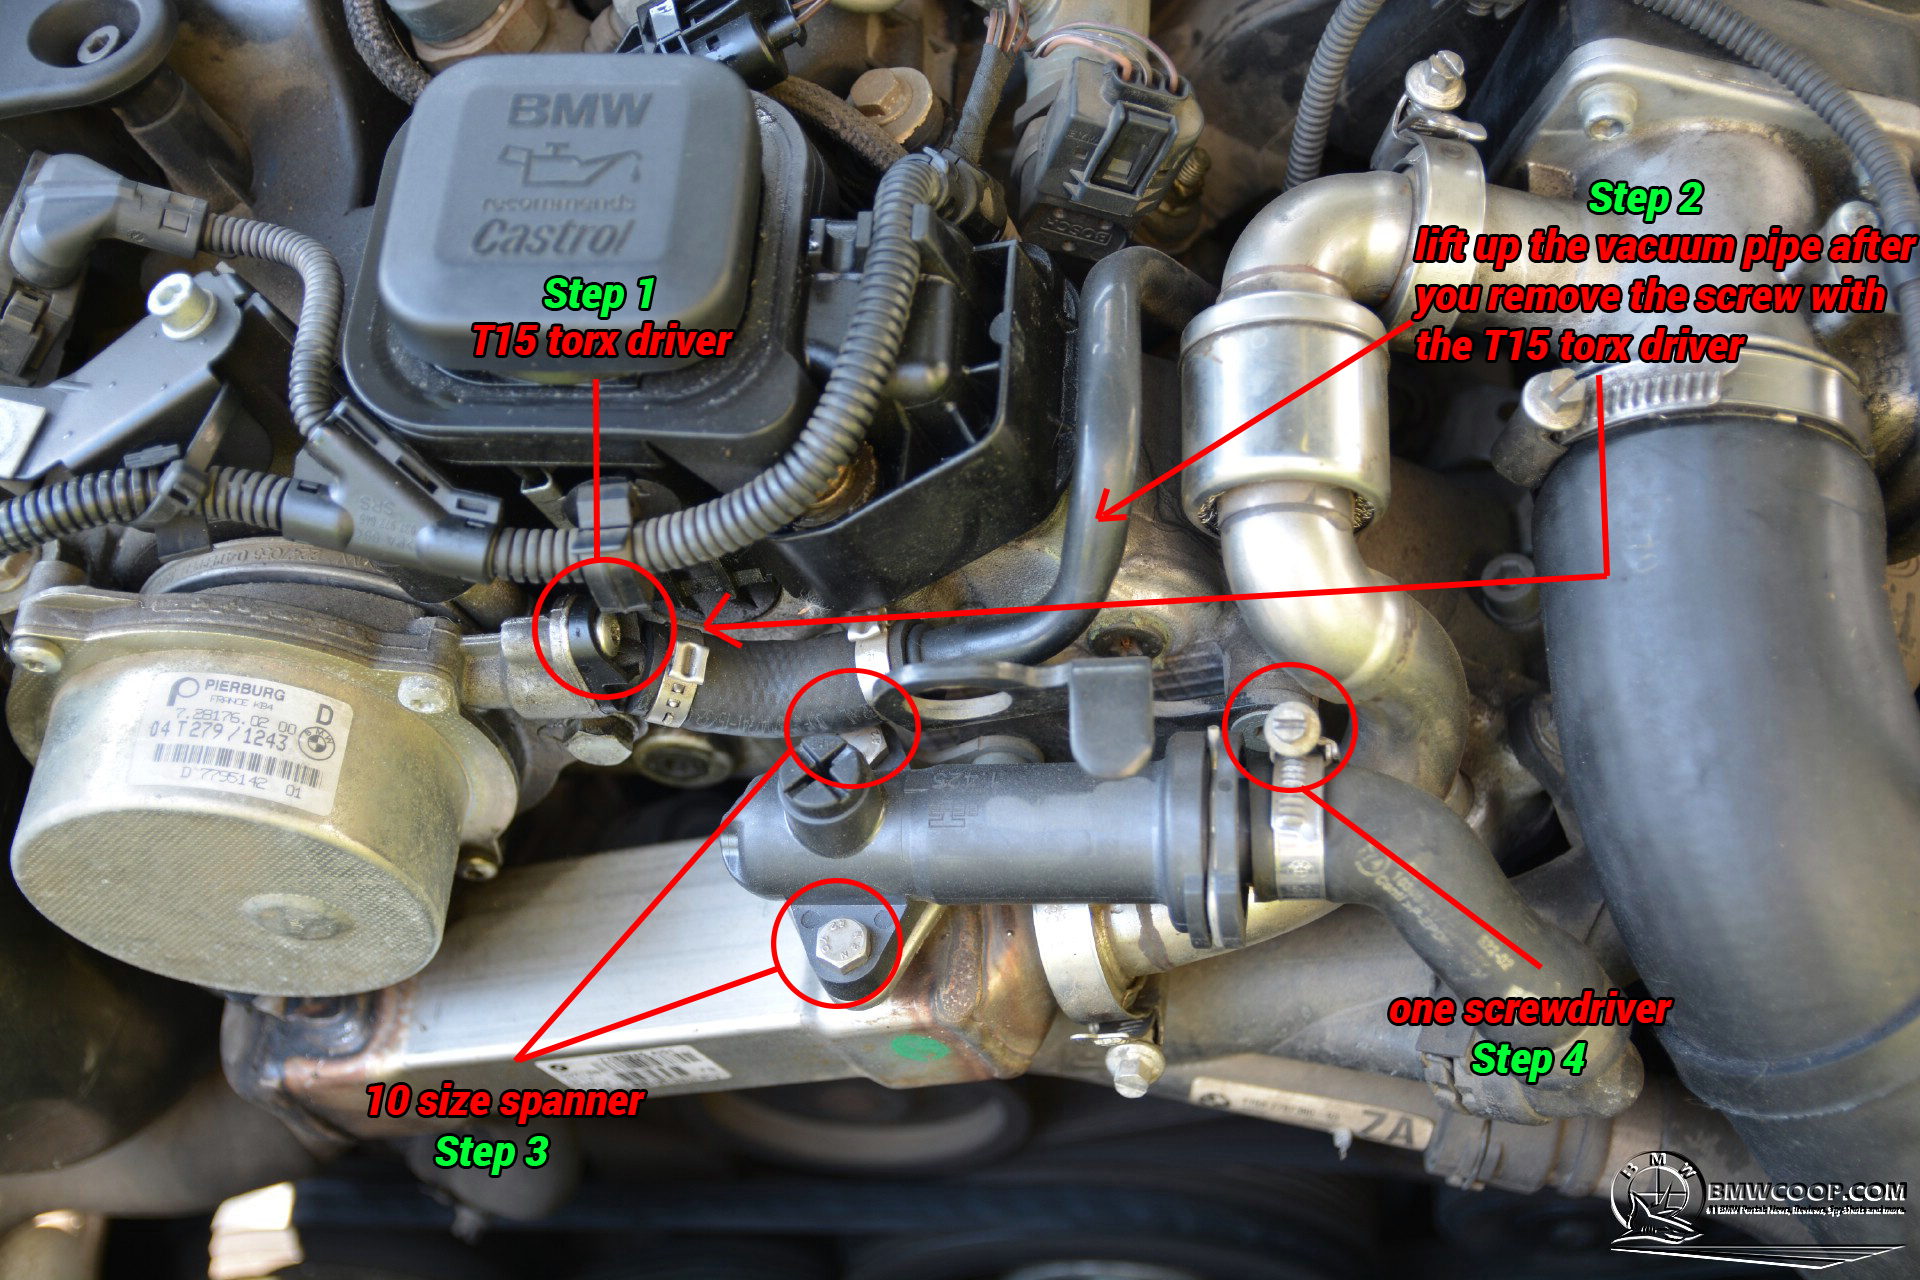 How-to-Change-the-EGR-Thermostat-on-E46-BMW-3-Series-9 FLEETIME